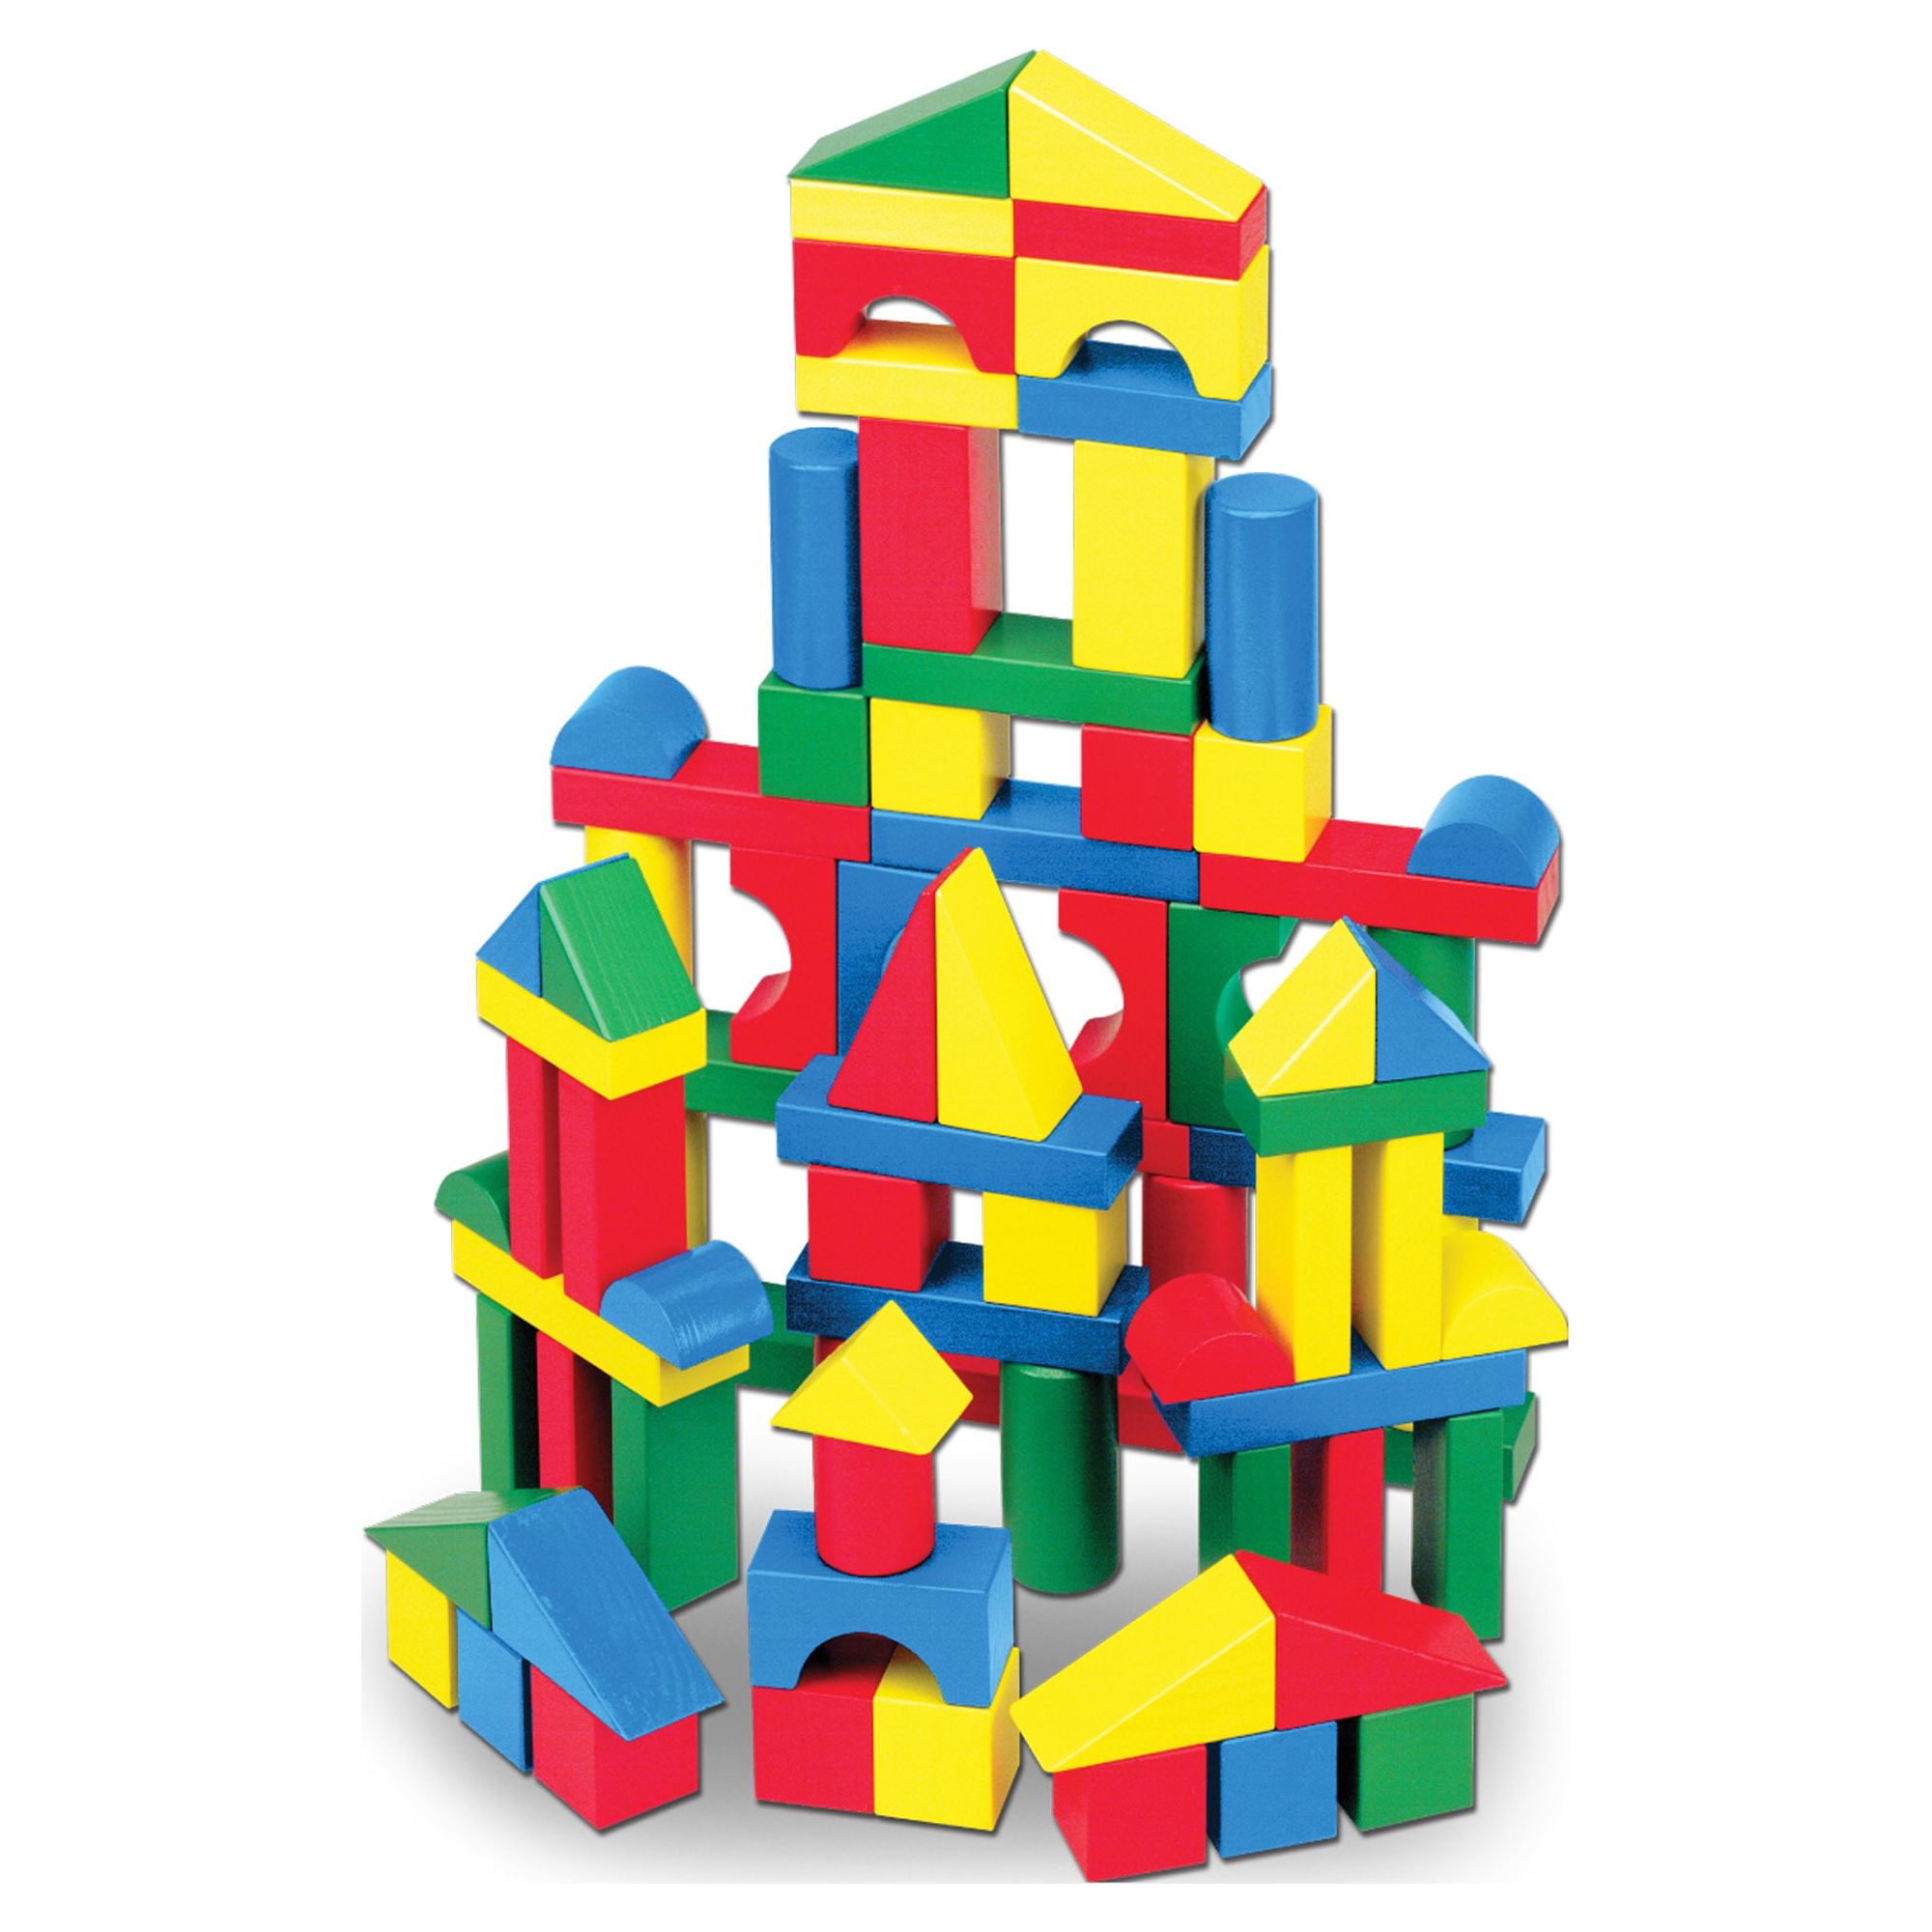 Melissa & Doug Wooden Building Blocks Set - 100 Blocks in 4 Colors and 9 Shapes - FSC Certified - image 1 of 11